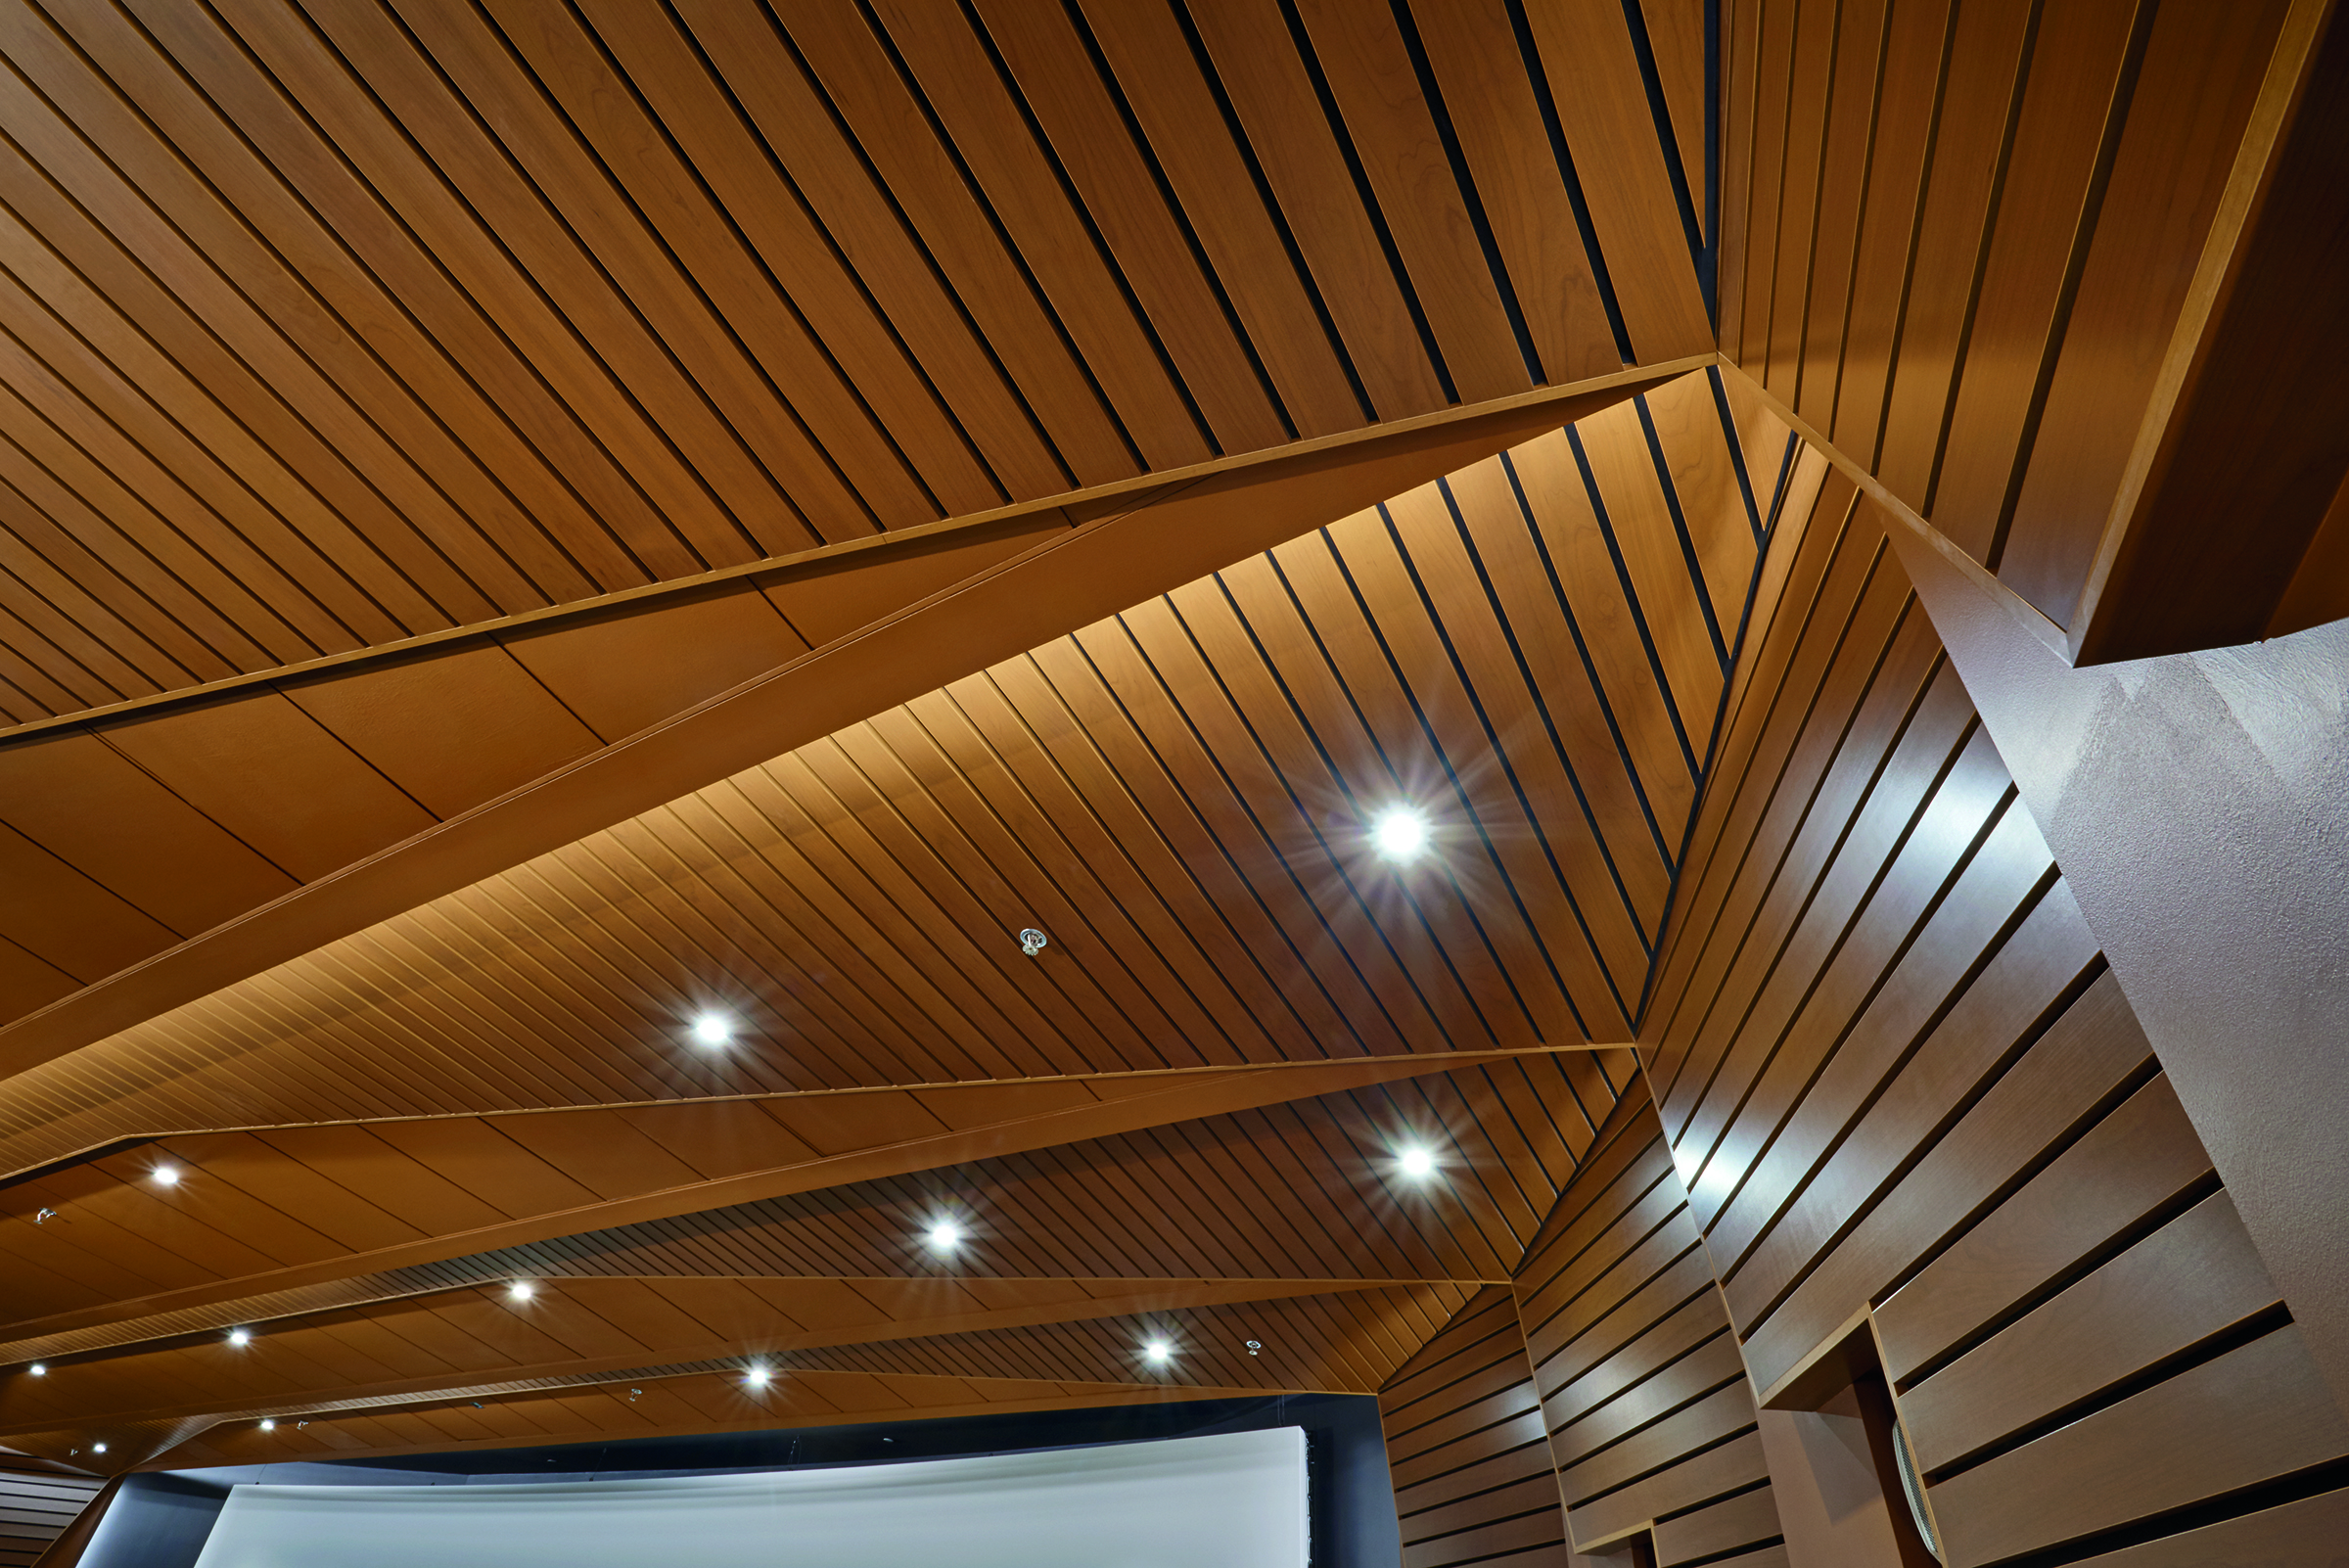 Wood Ceilings And Walls Help Convey Energy Of College